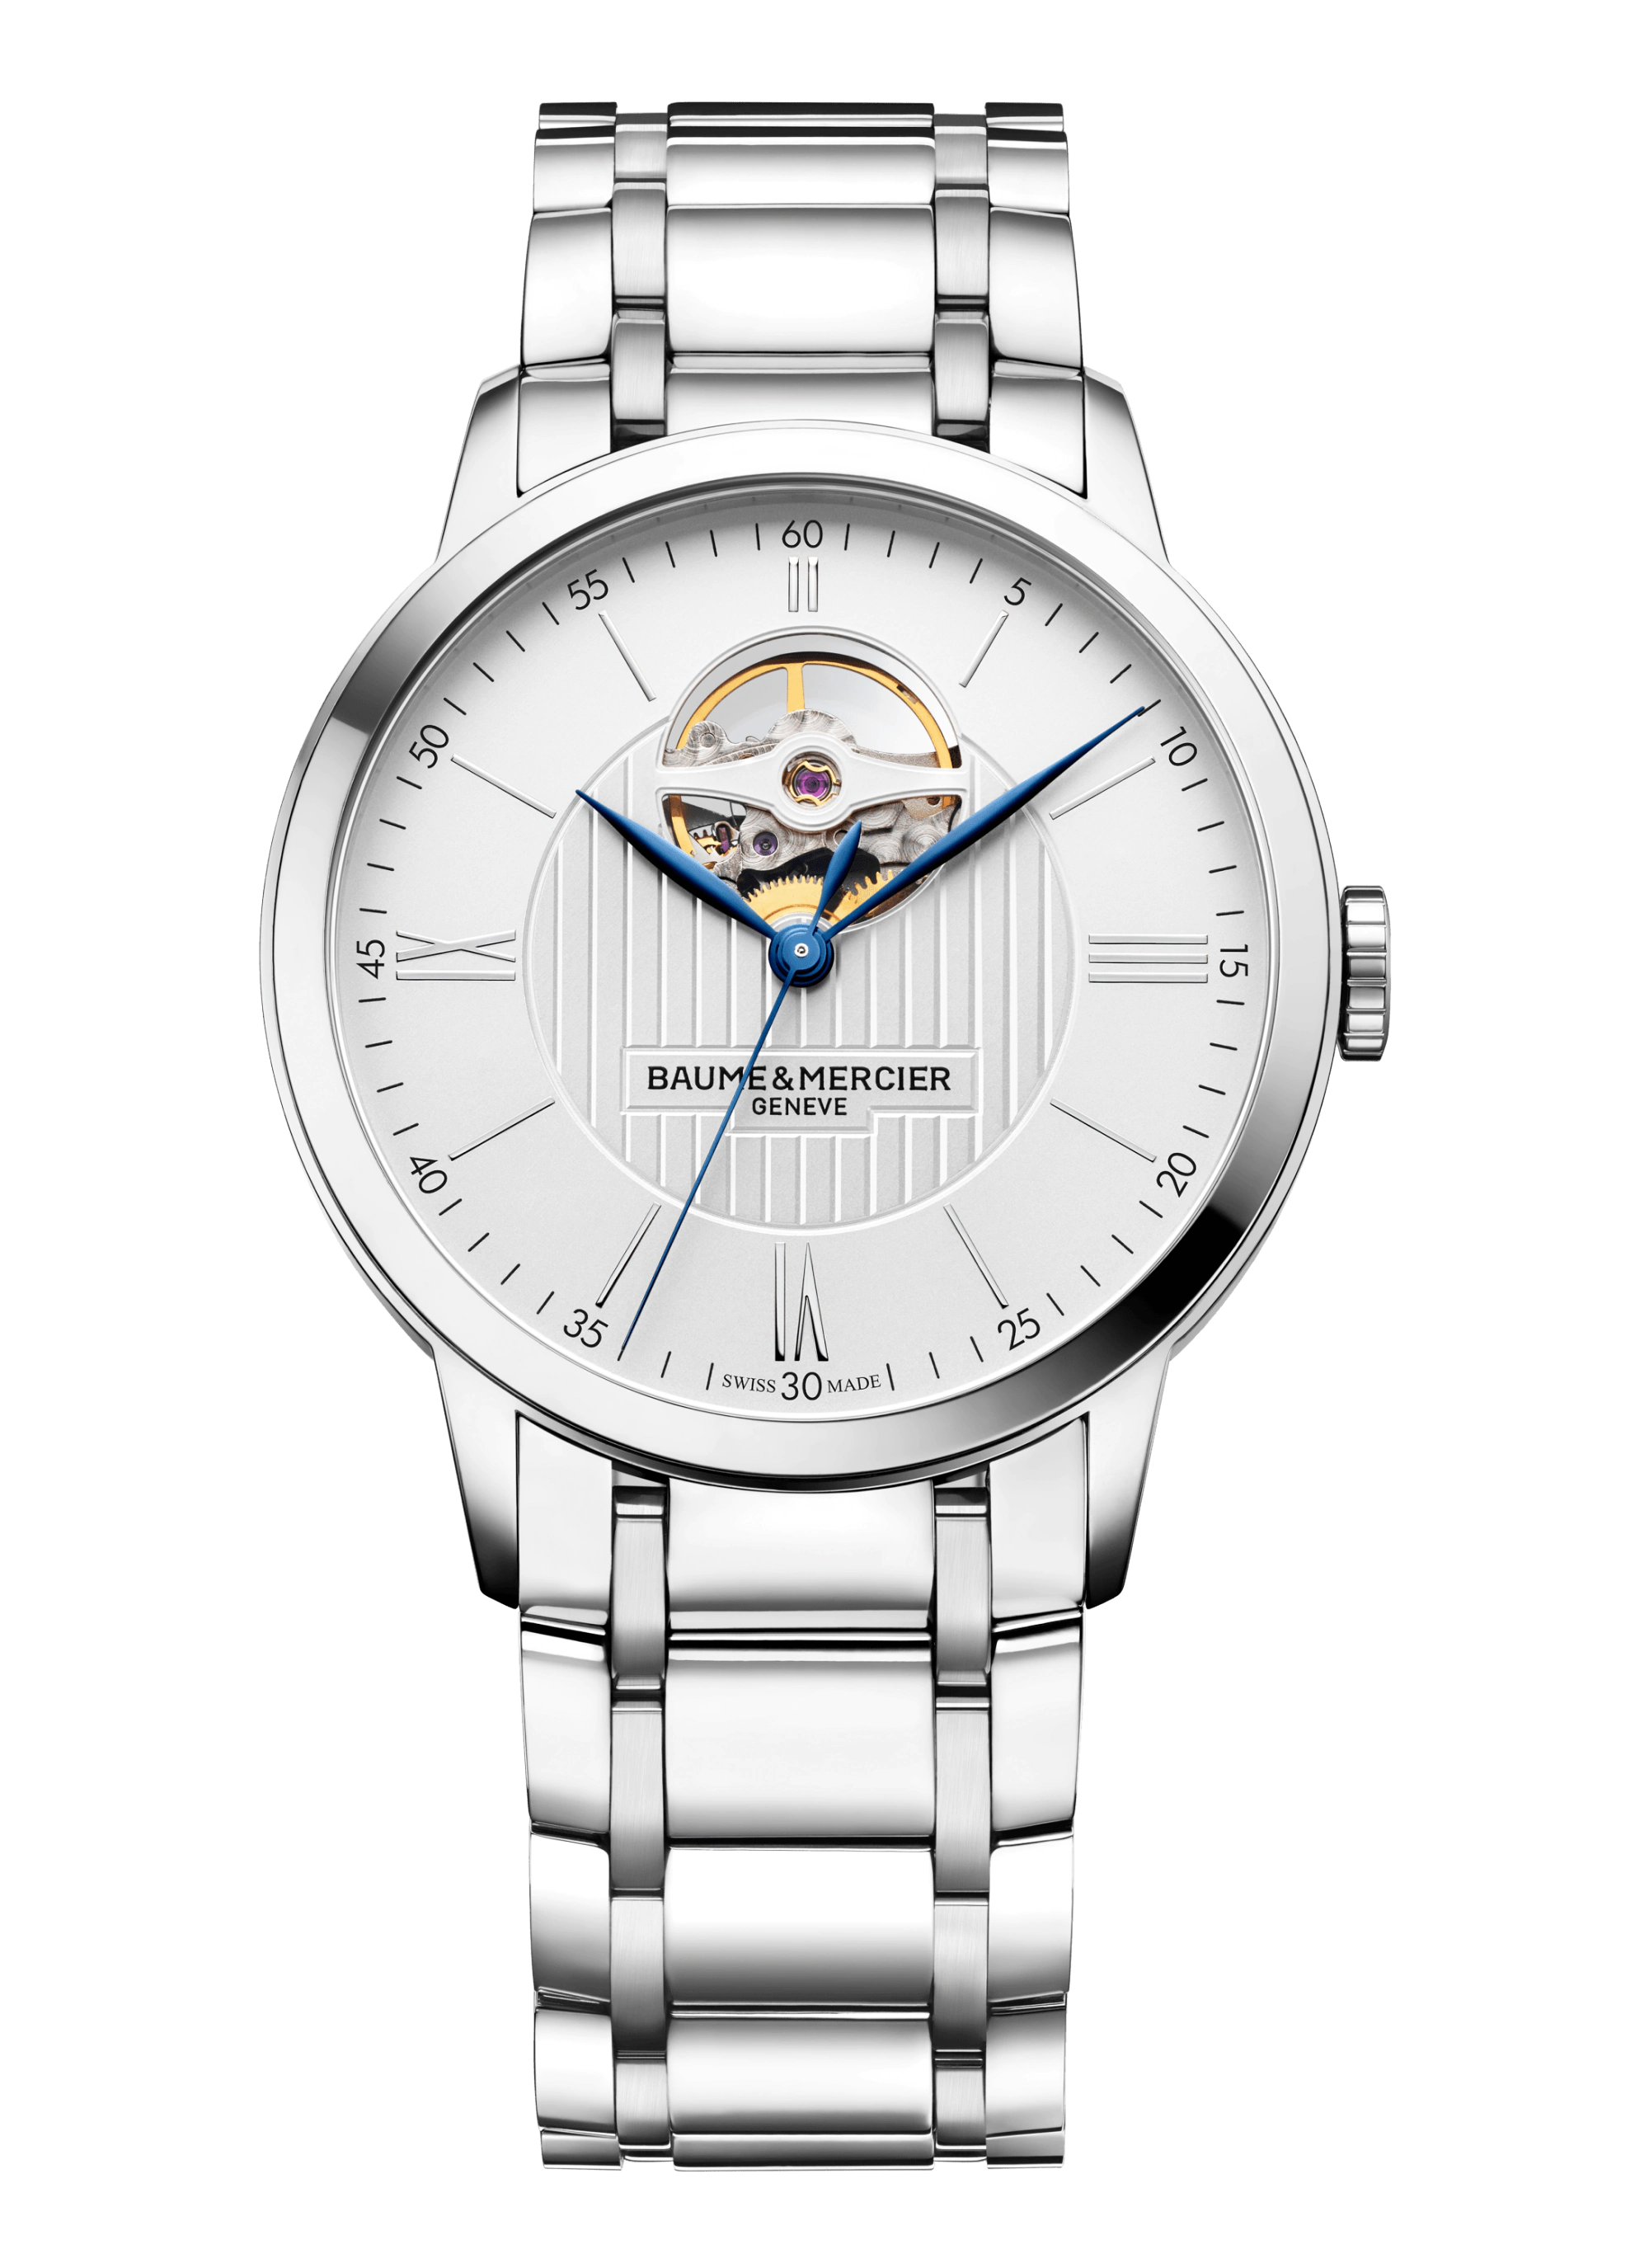 Baume & Mercier MOA10275 VIPs watch collection